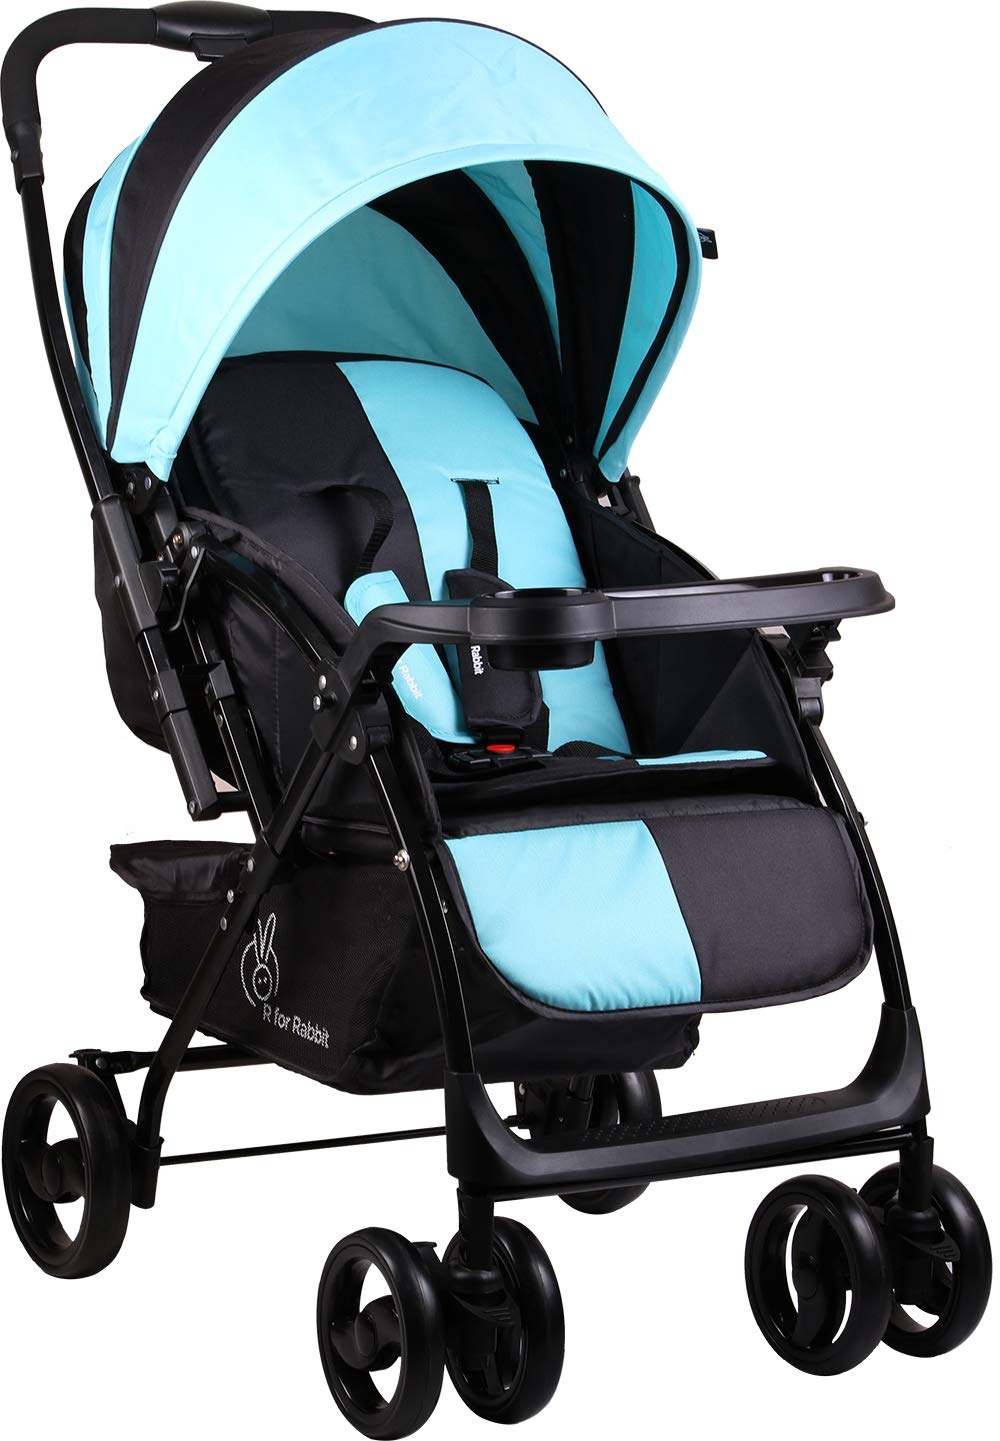 Mothercare | R For Rabbit Cuppy Cake Grand Baby Strollers Blue Black